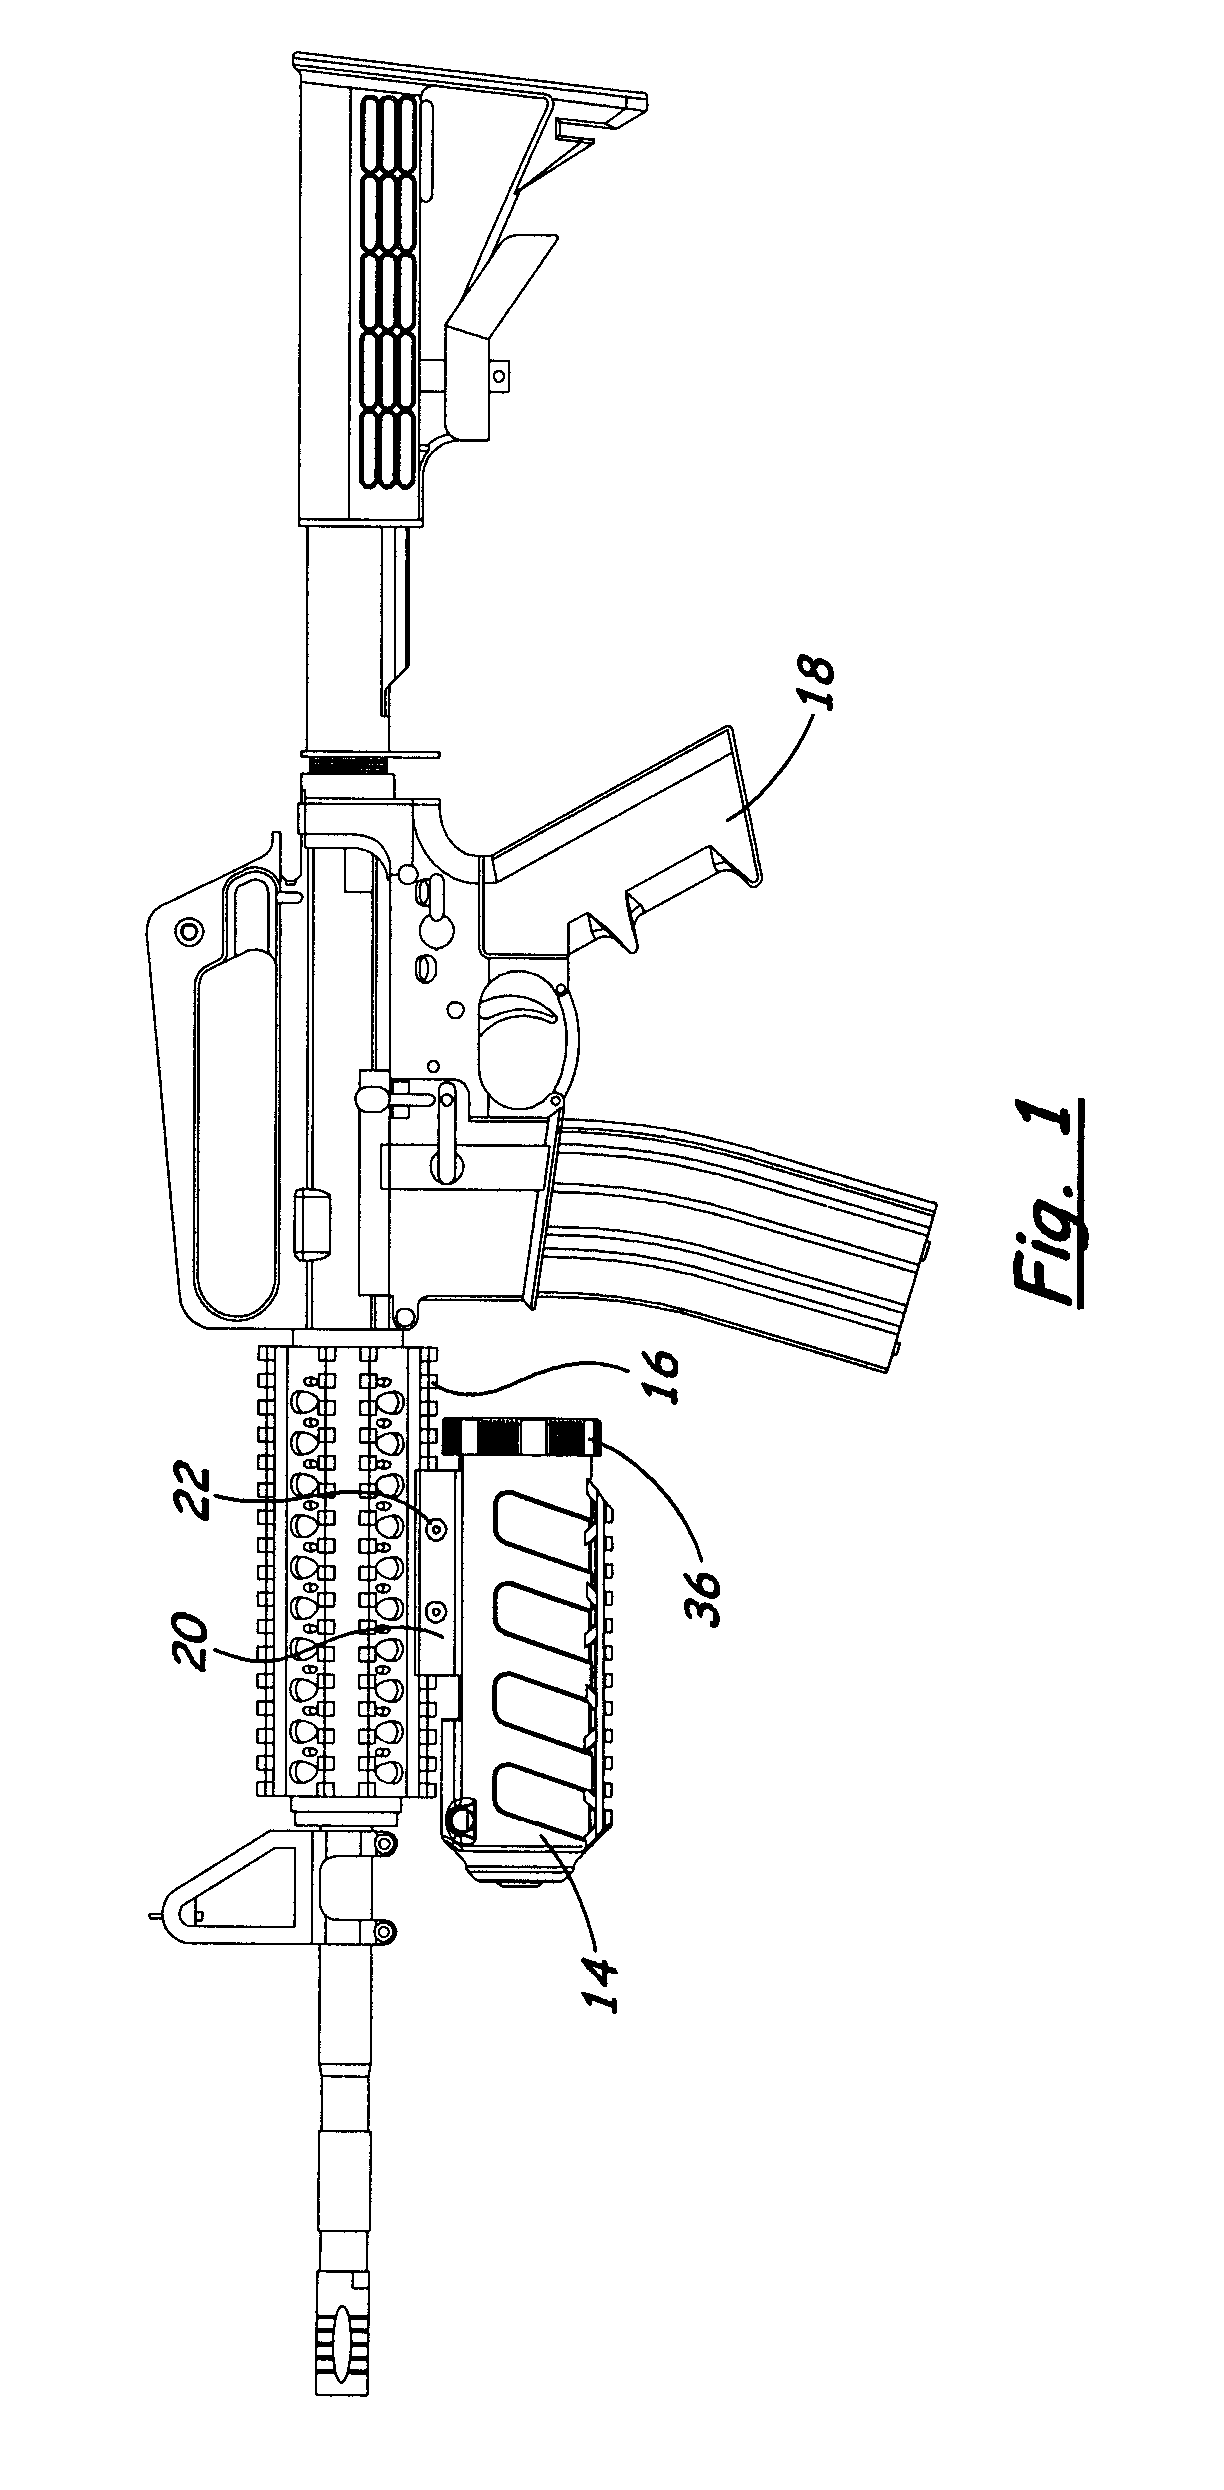 Rifle mounted pepper spray device with slide activation